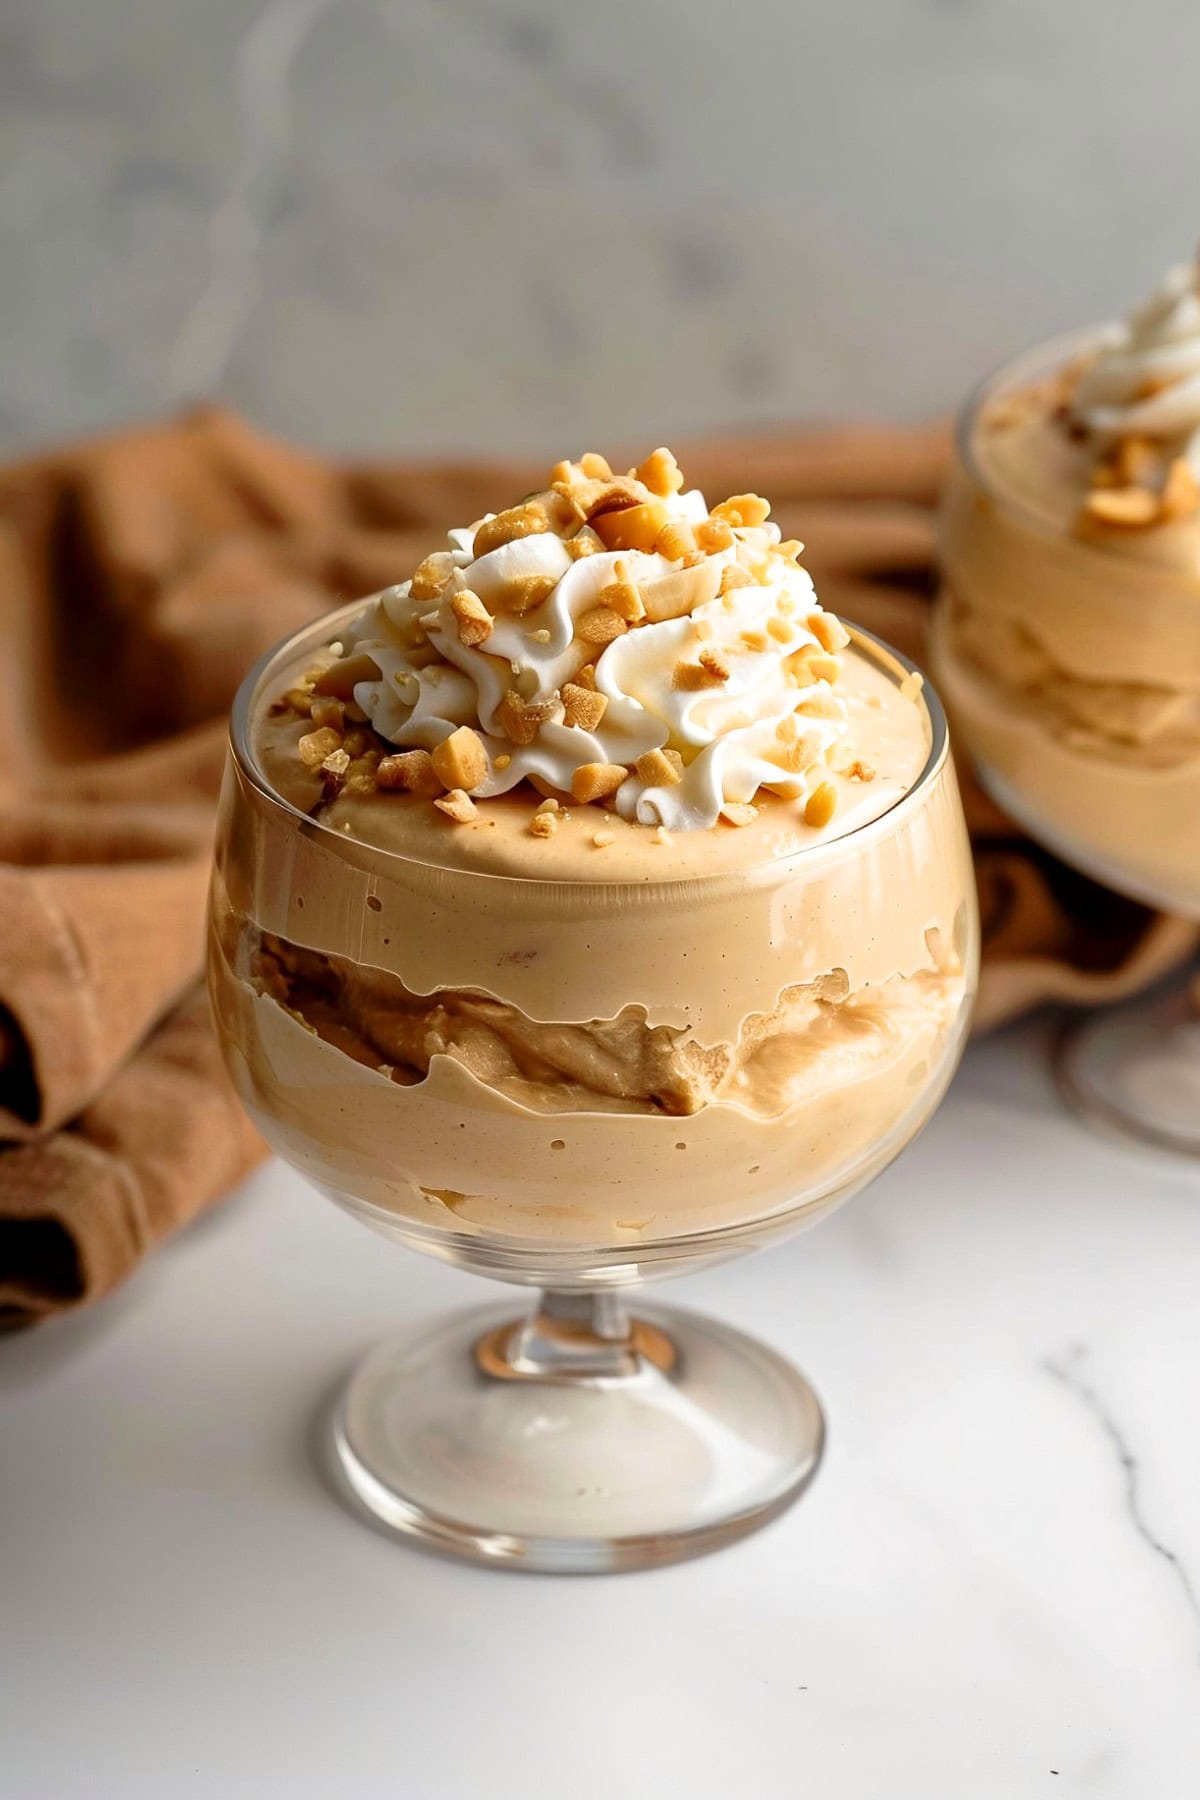 Creamy peanut butter mousse topped with whipped cream and chopped nuts